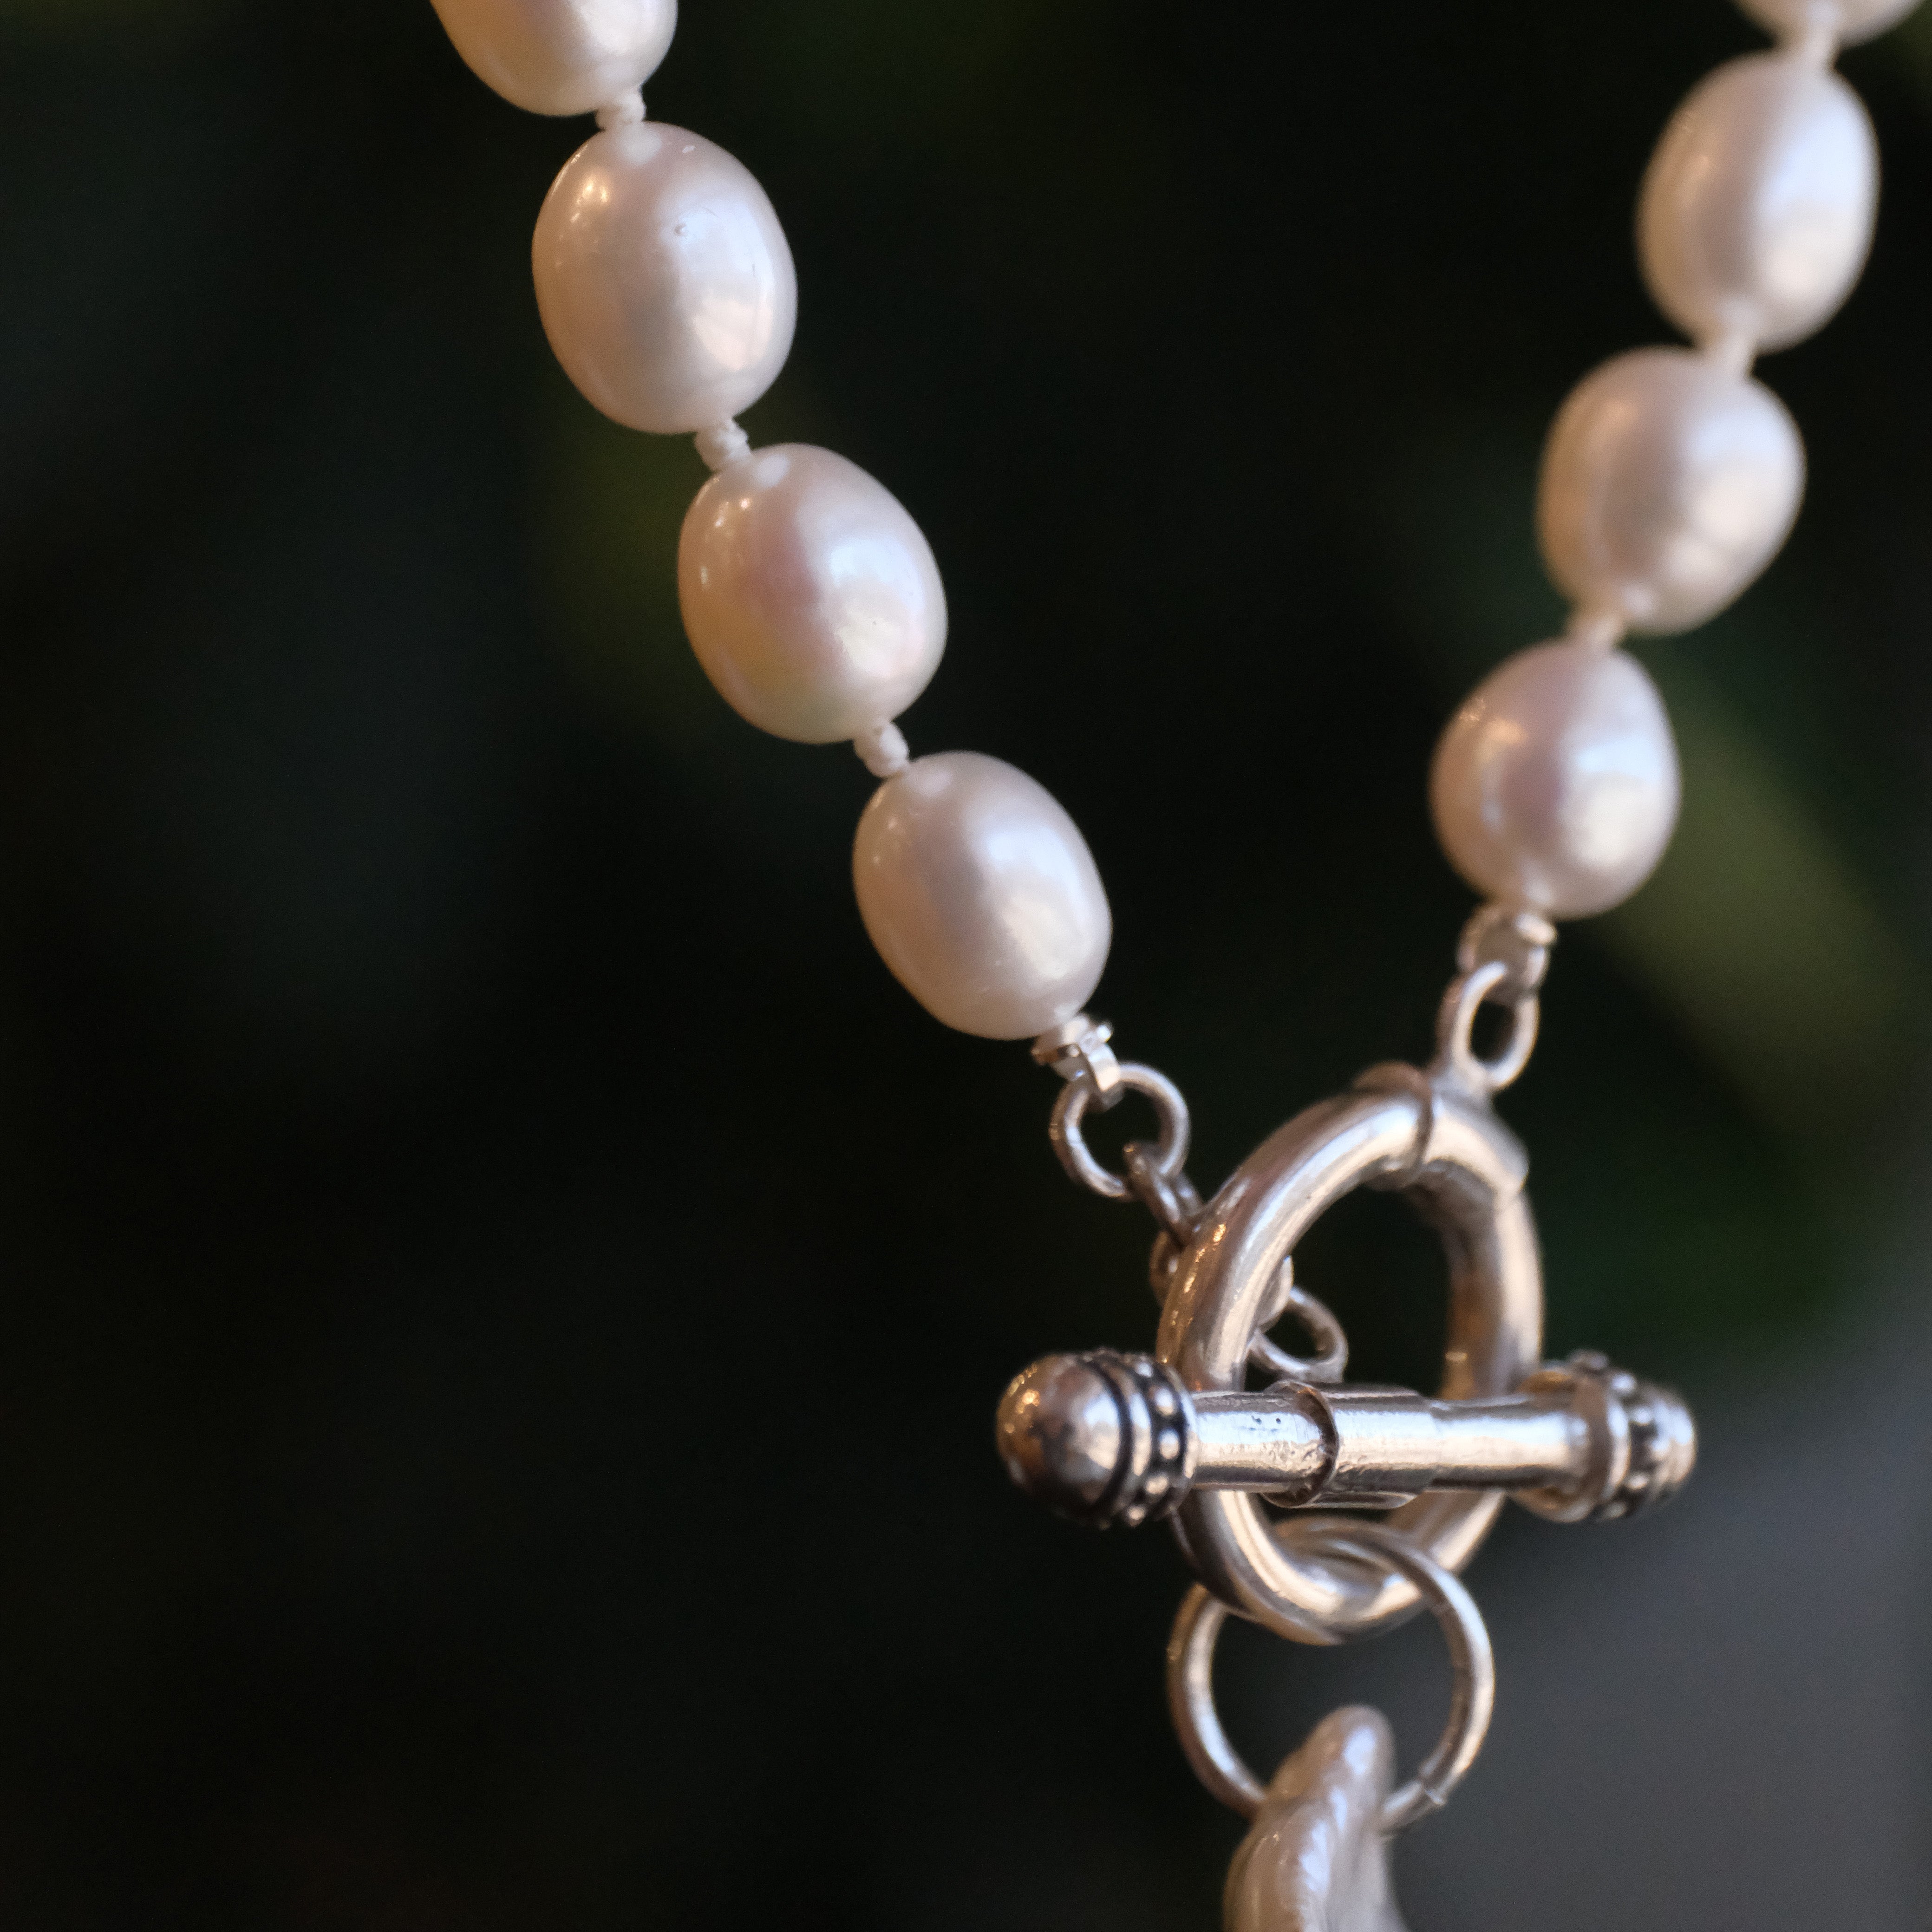 Into White Pearl + Sterling Necklace - One of a Kind